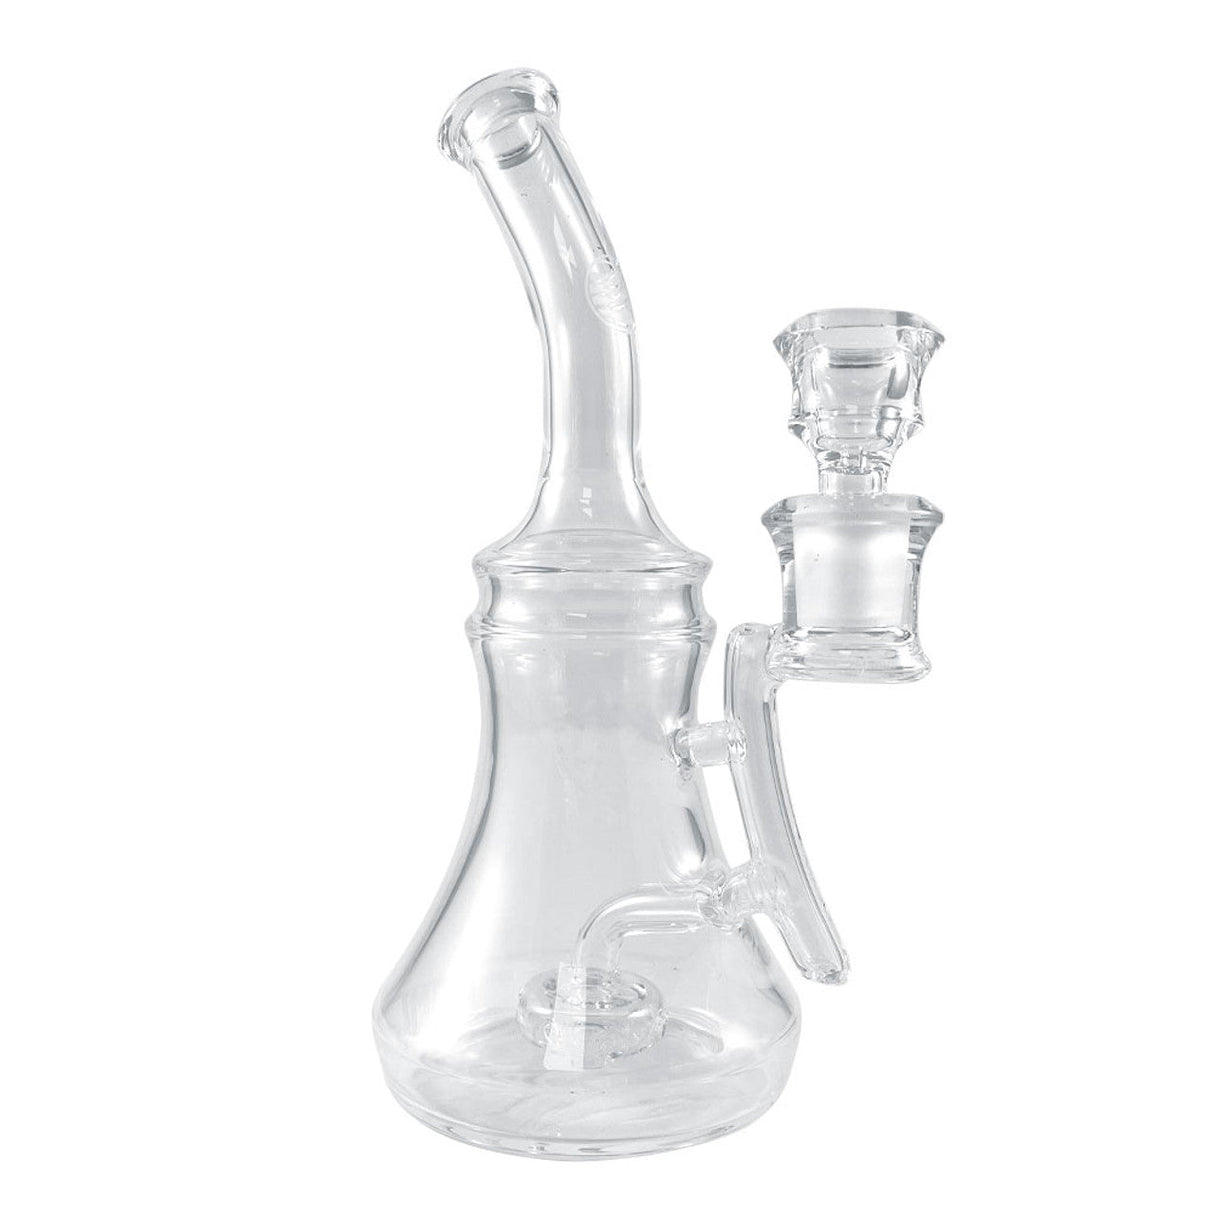 Nami Glass 9" Ripple Rig with clear glass and side percolator, front view on white background